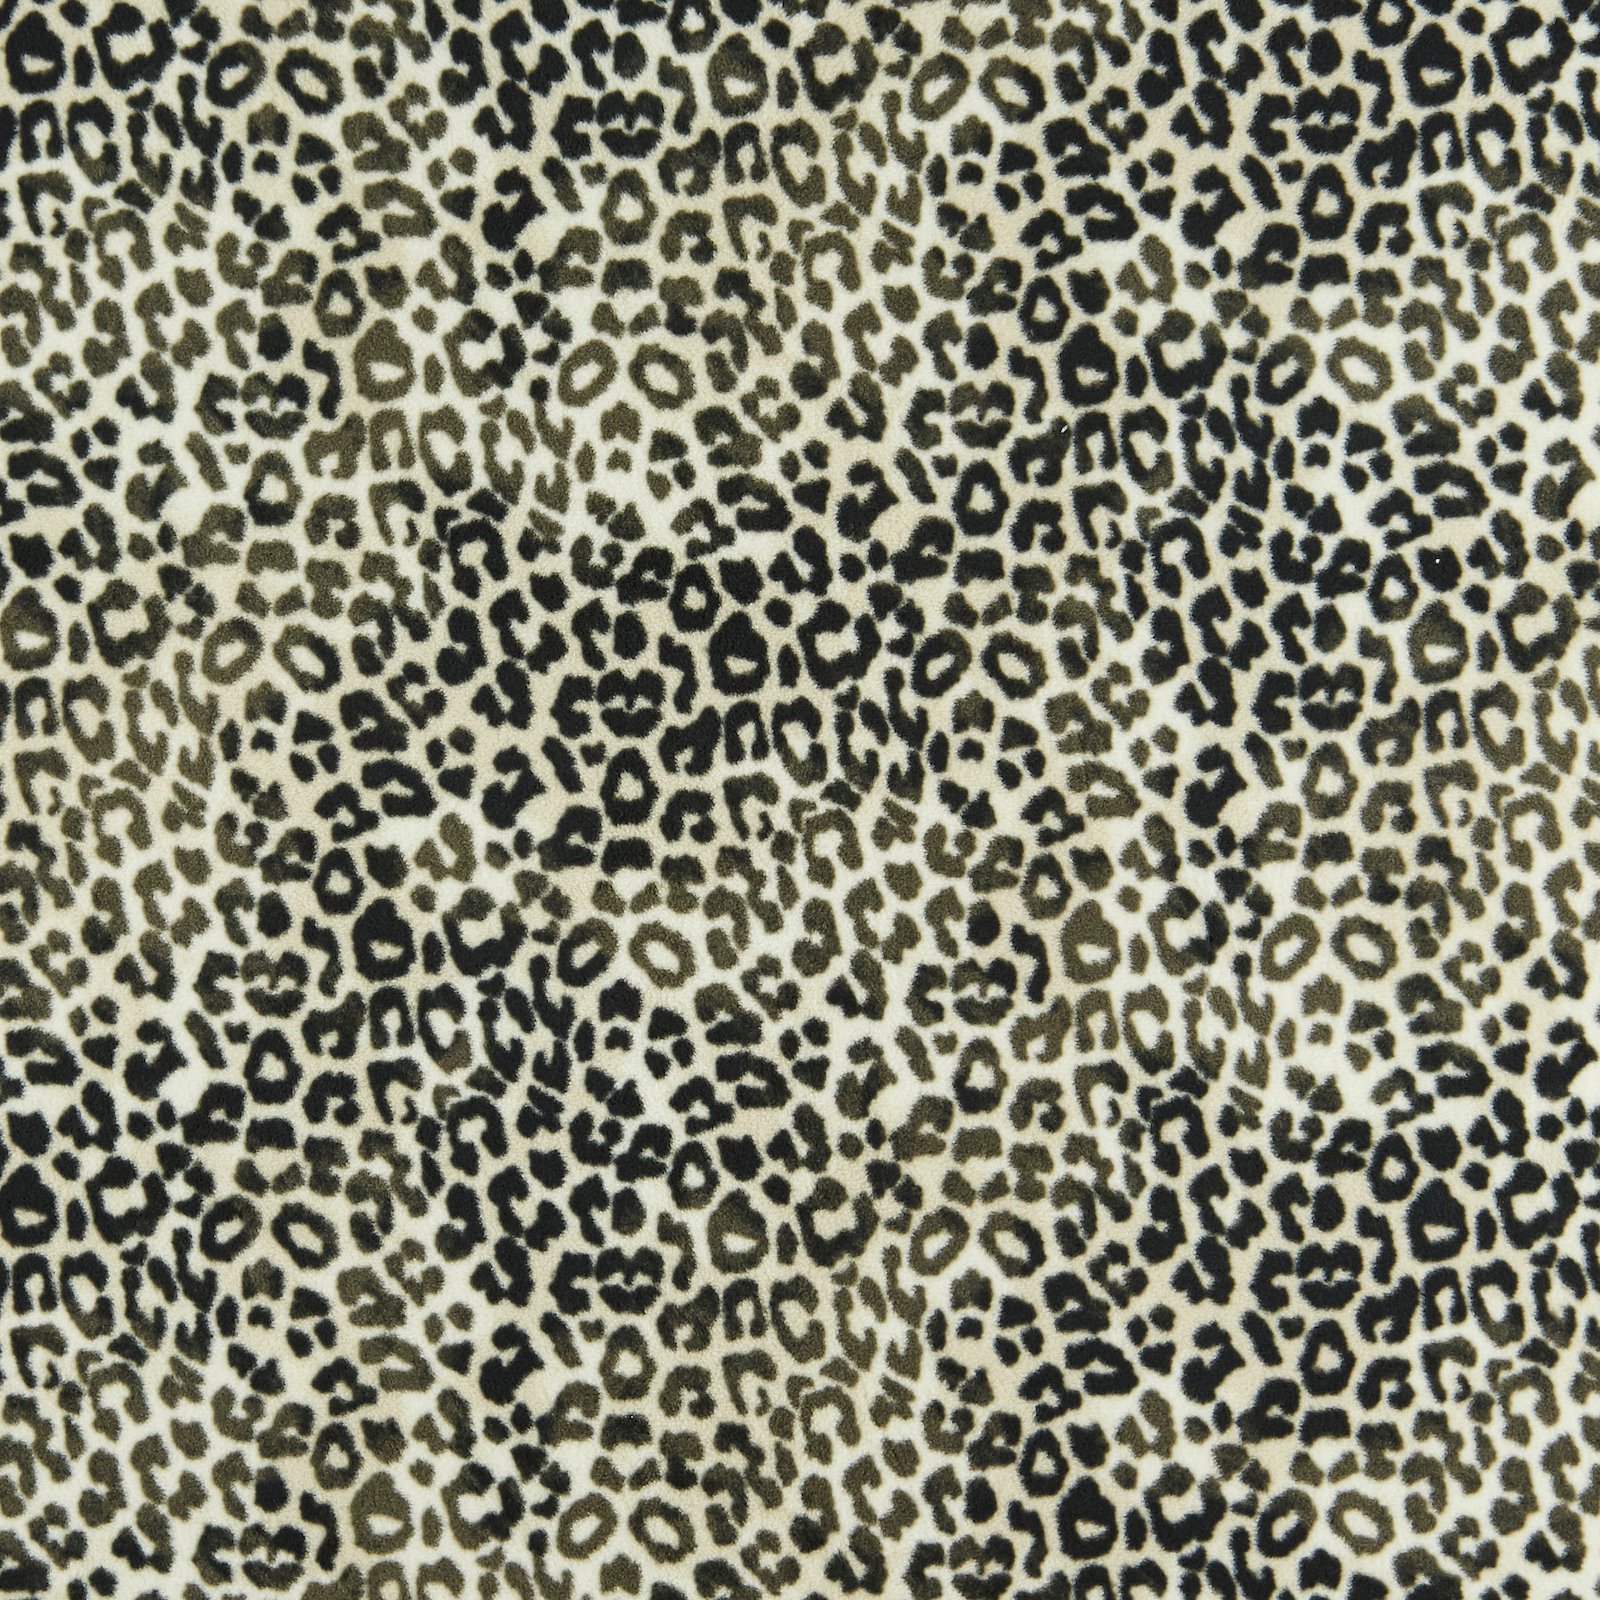 Polar fleece with leopard print 220688_pack_solid